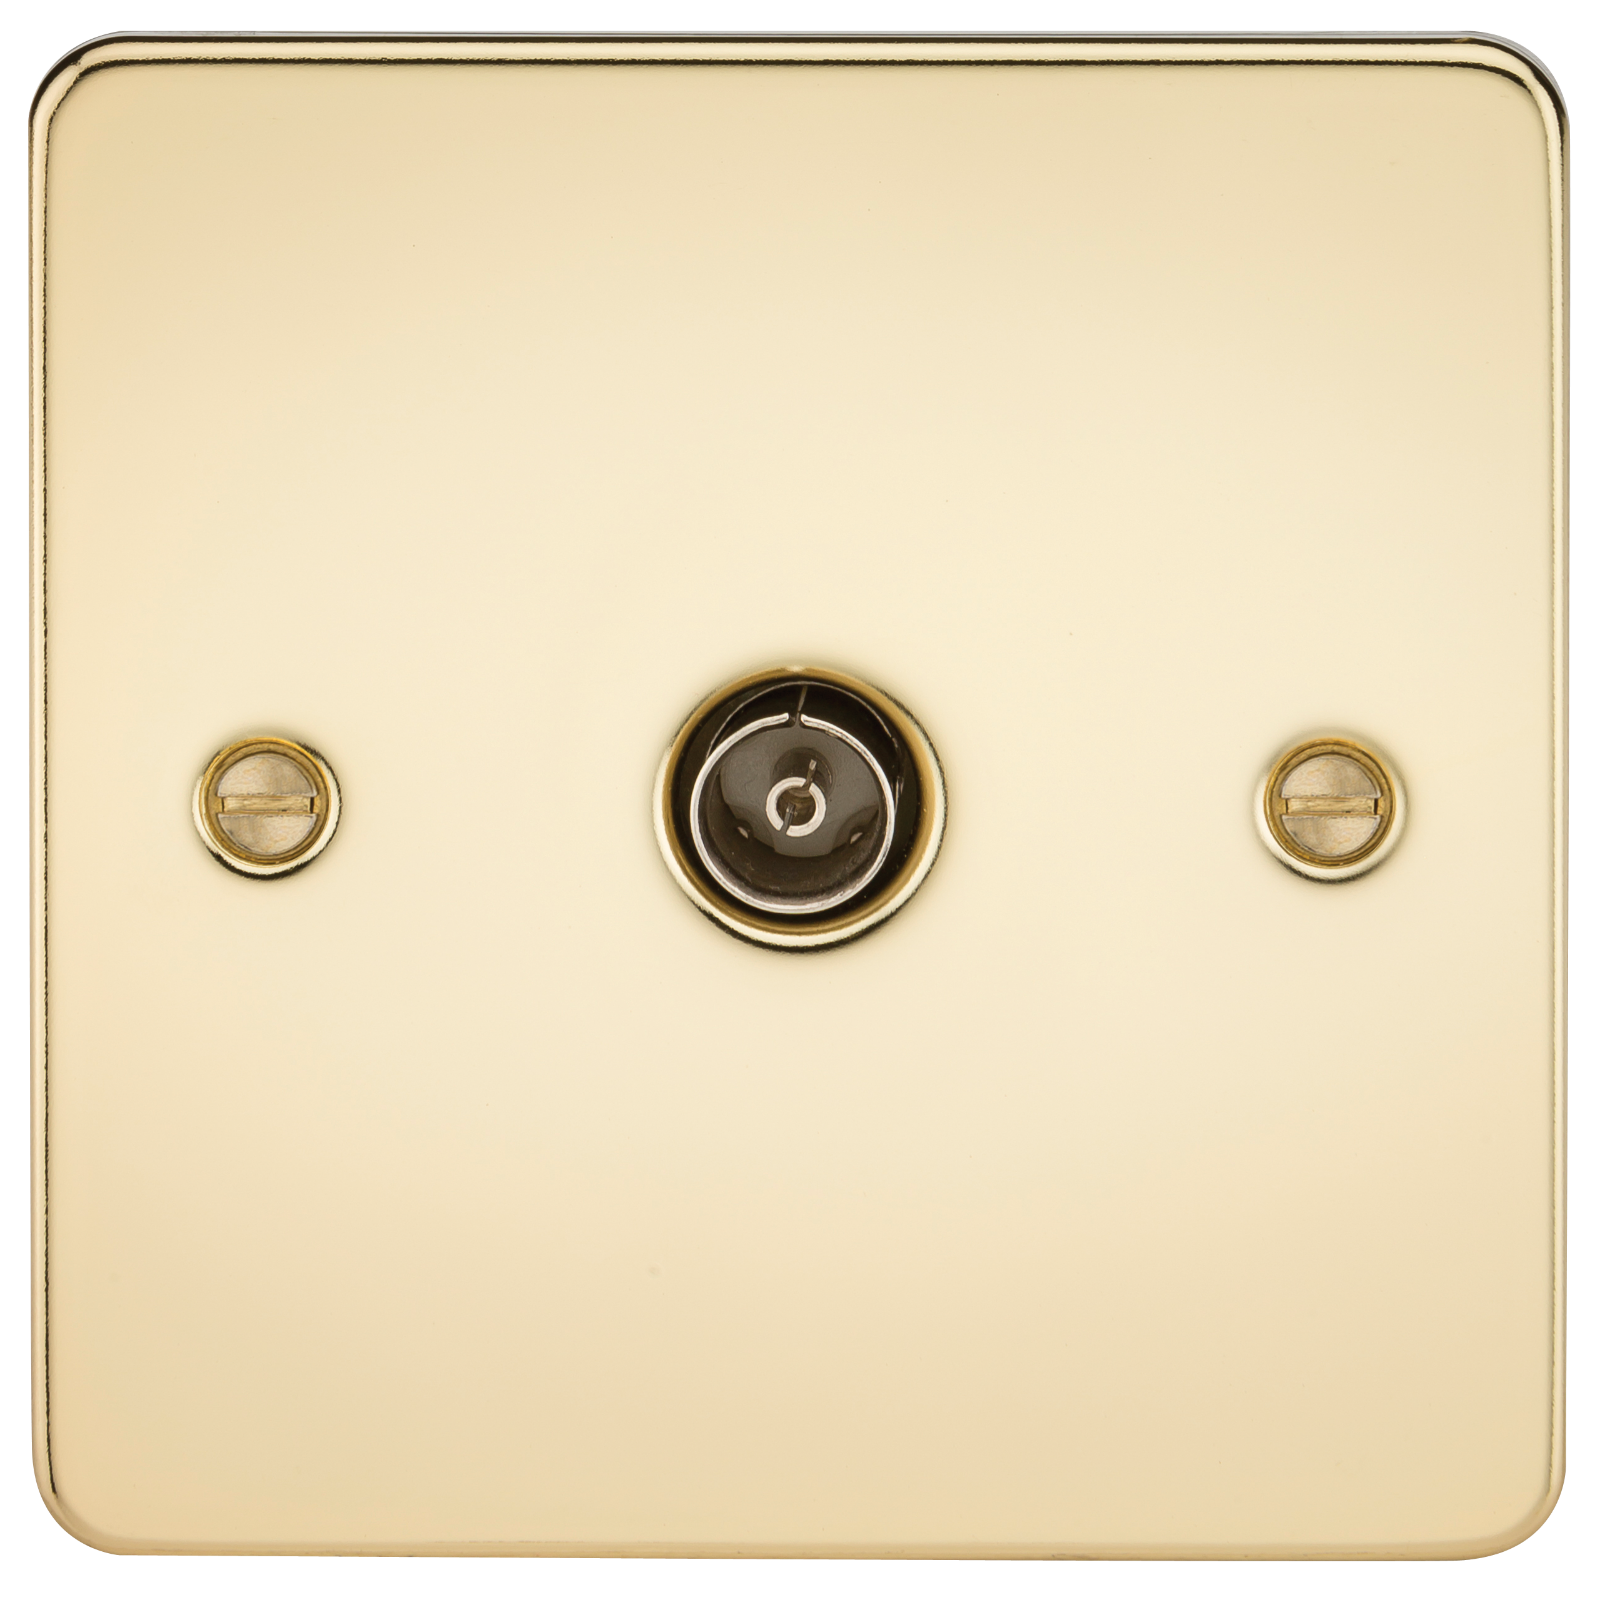 Flat Plate 1G TV Outlet (non-isolated) - Polished Brass - FP0100PB 